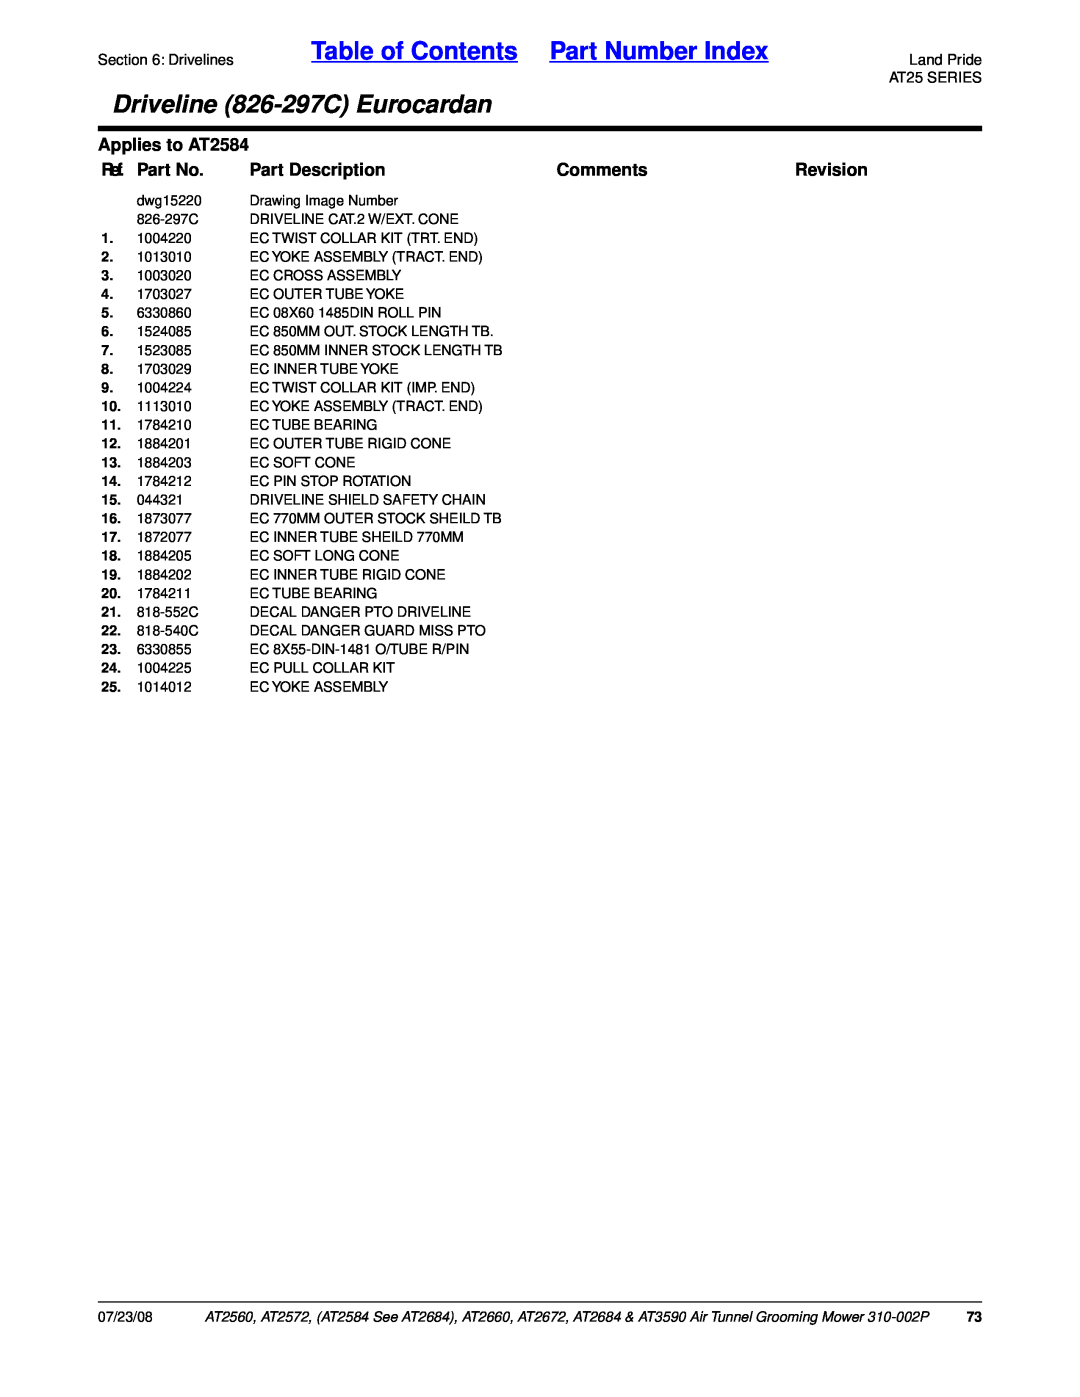 Land Pride Table of Contents Part Number Index, Driveline 826-297CEurocardan, Applies to AT2584, Ref. Part No, Comments 